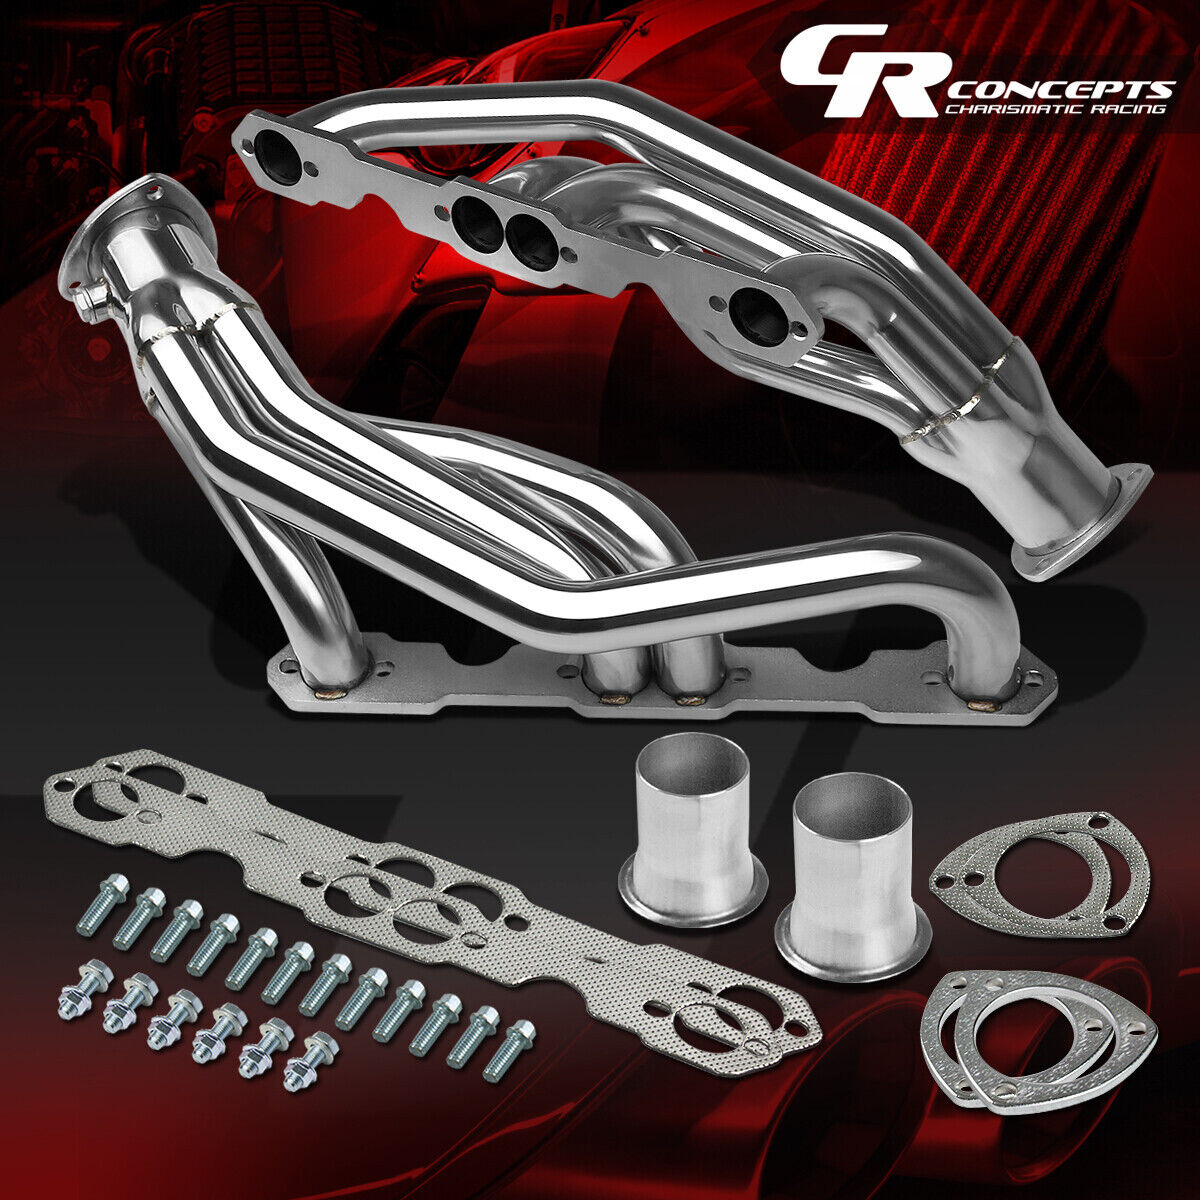 STAINLESS STEEL RACE MANIFOLD HEADER/EXHAUST FOR 88-97 GMC CHEVY PICKUP 5.0 5.7